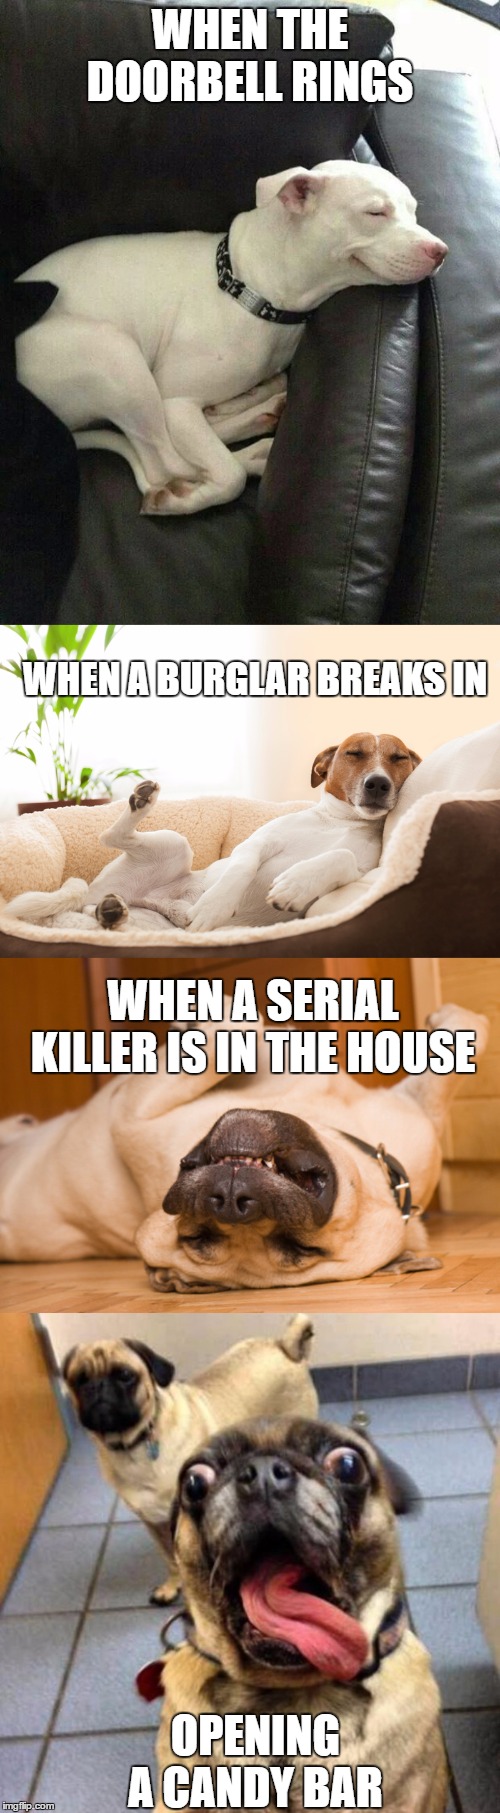 Just when you thought it was safe to eat | WHEN THE DOORBELL RINGS; WHEN A BURGLAR BREAKS IN; WHEN A SERIAL KILLER IS IN THE HOUSE; OPENING A CANDY BAR | image tagged in dog,random,candy,wtf | made w/ Imgflip meme maker